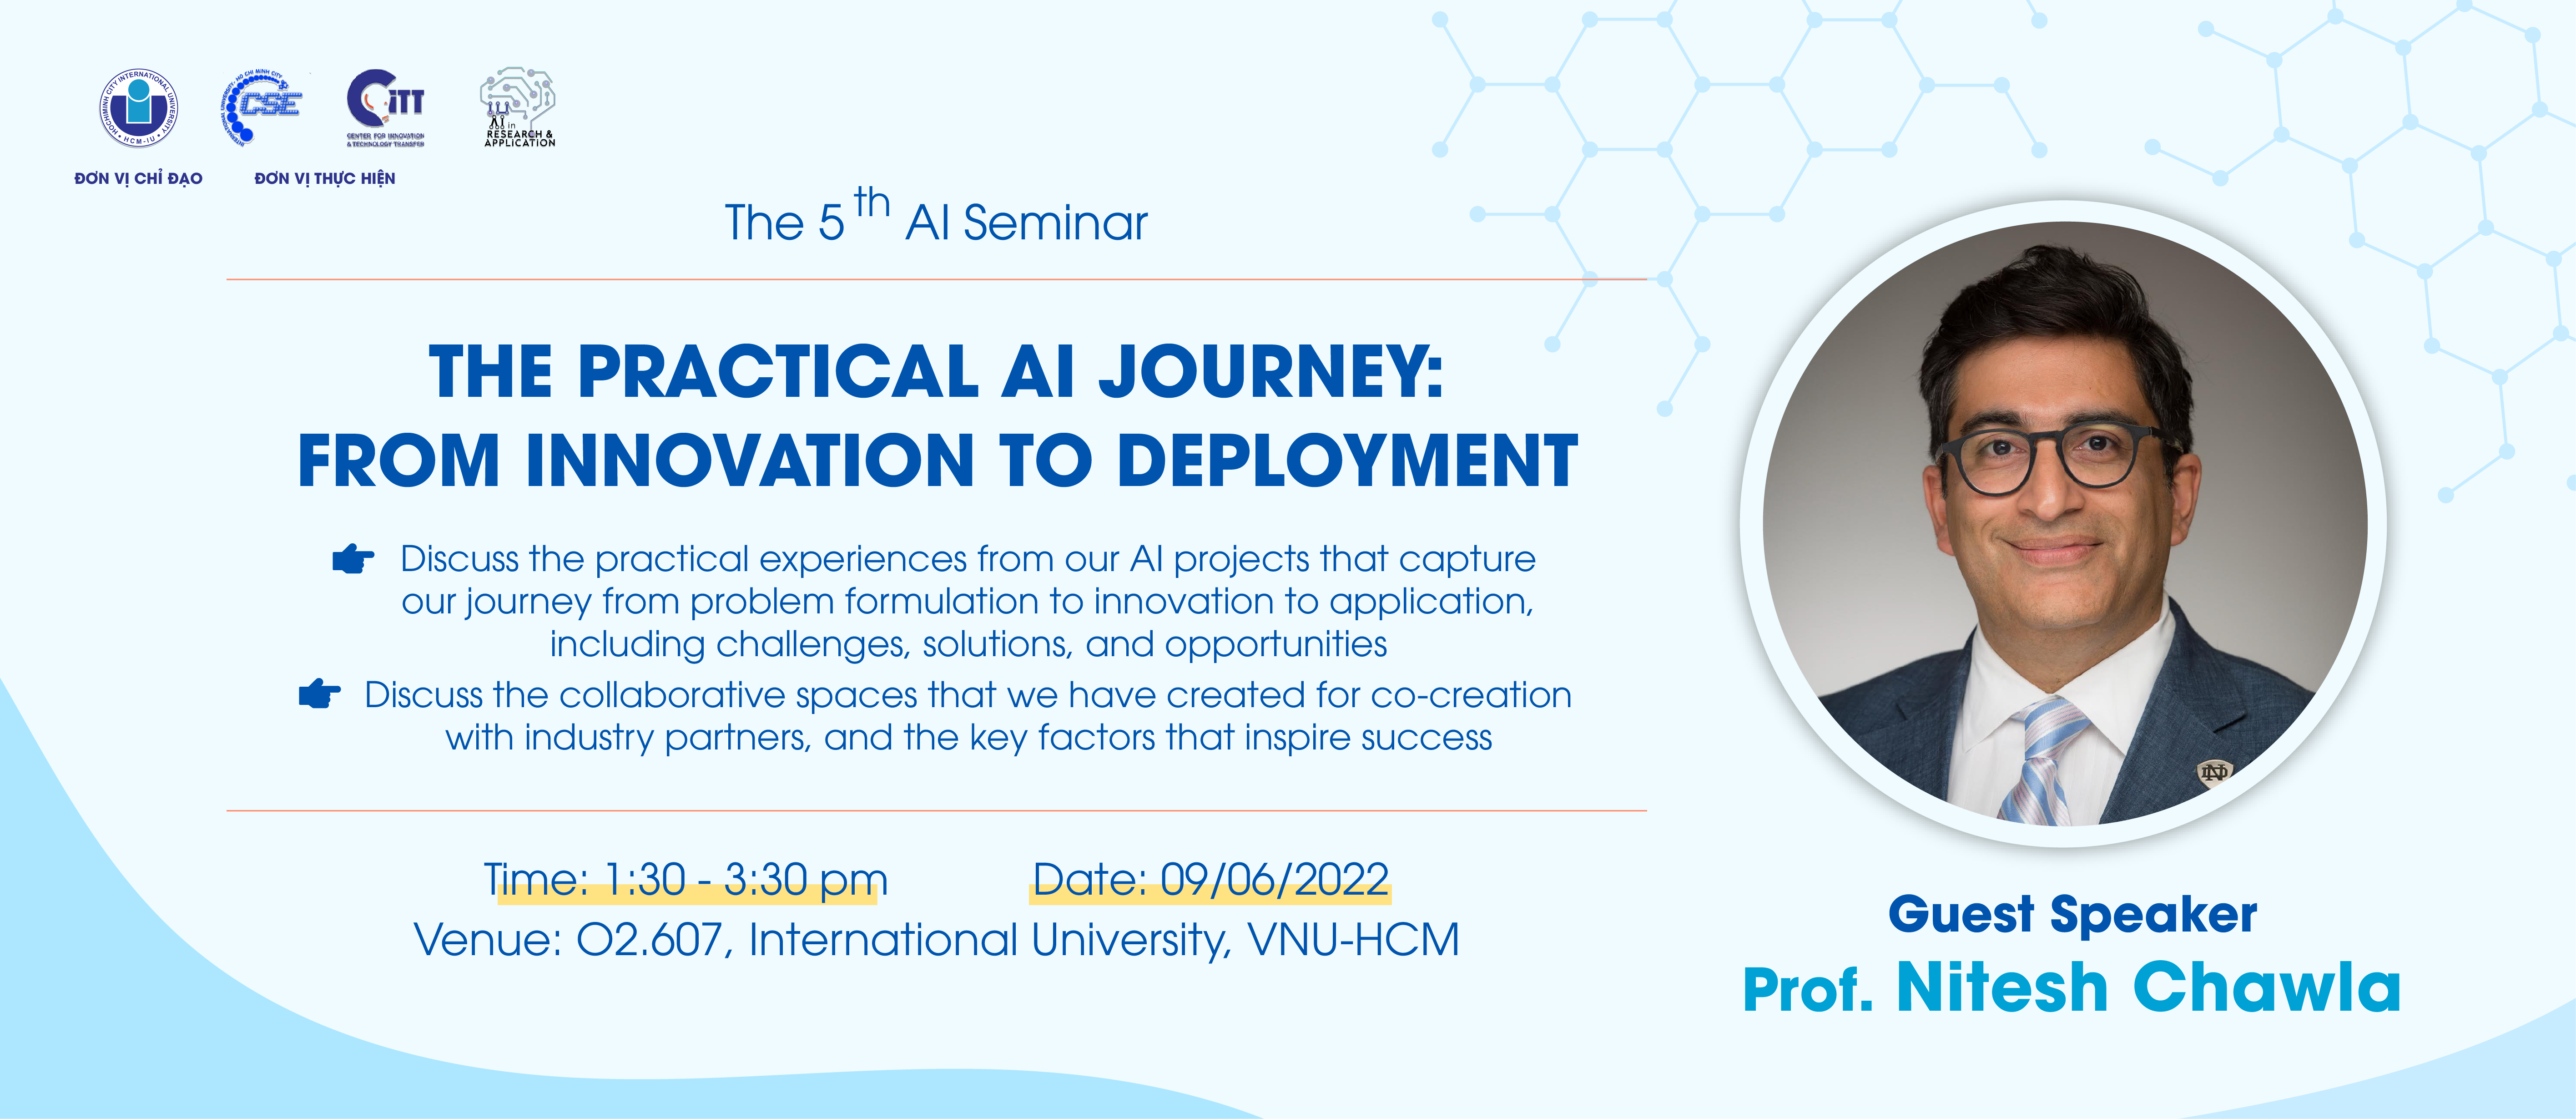 !!The 5th AI Seminar: The Practical AI Journey: From Innovation to Deployment!!